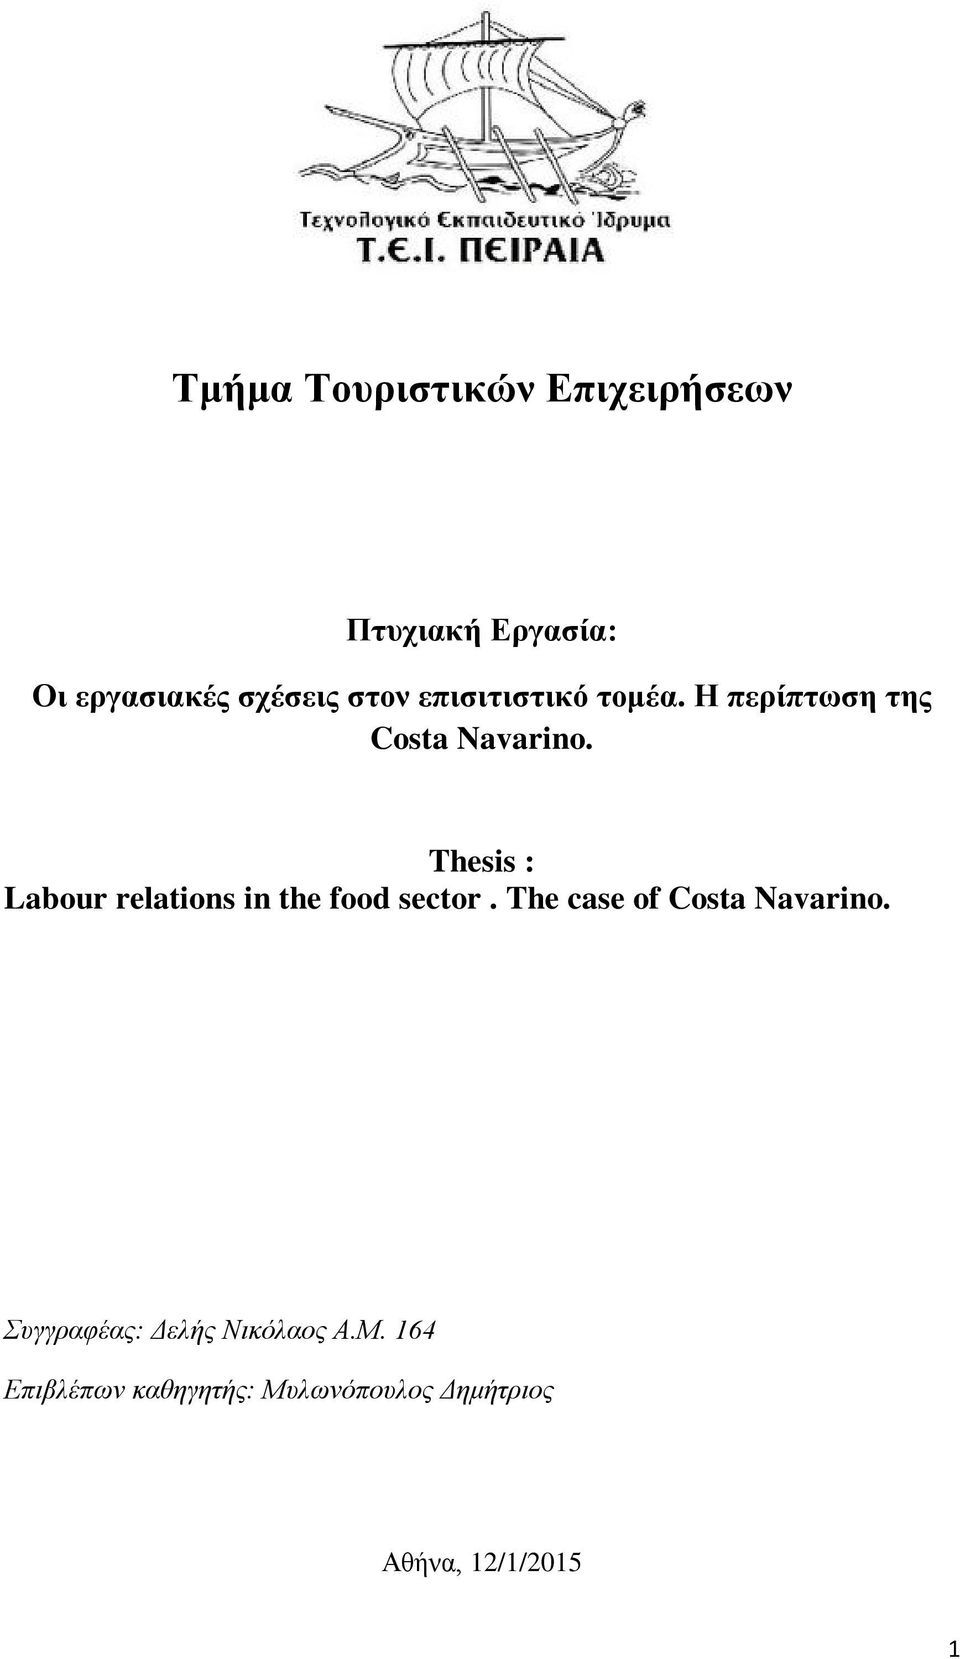 Thesis : Labour relations in the food sector. The case of Costa Navarino.